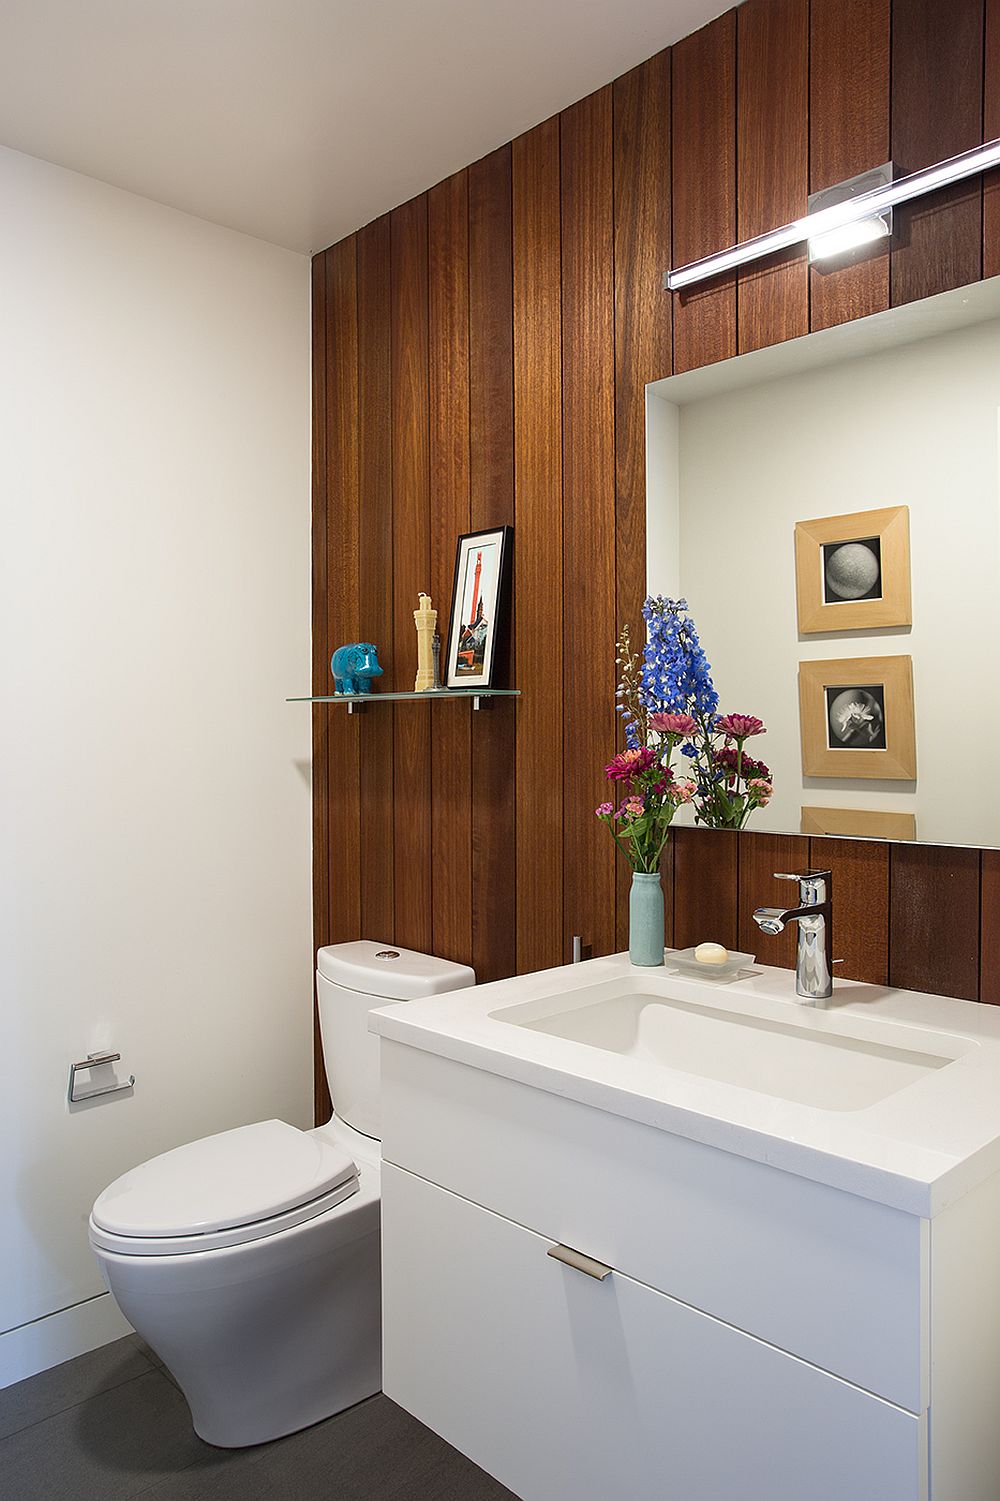 Mahogany panels add elegance to the contemporary bathroom without disturbing the color scheme